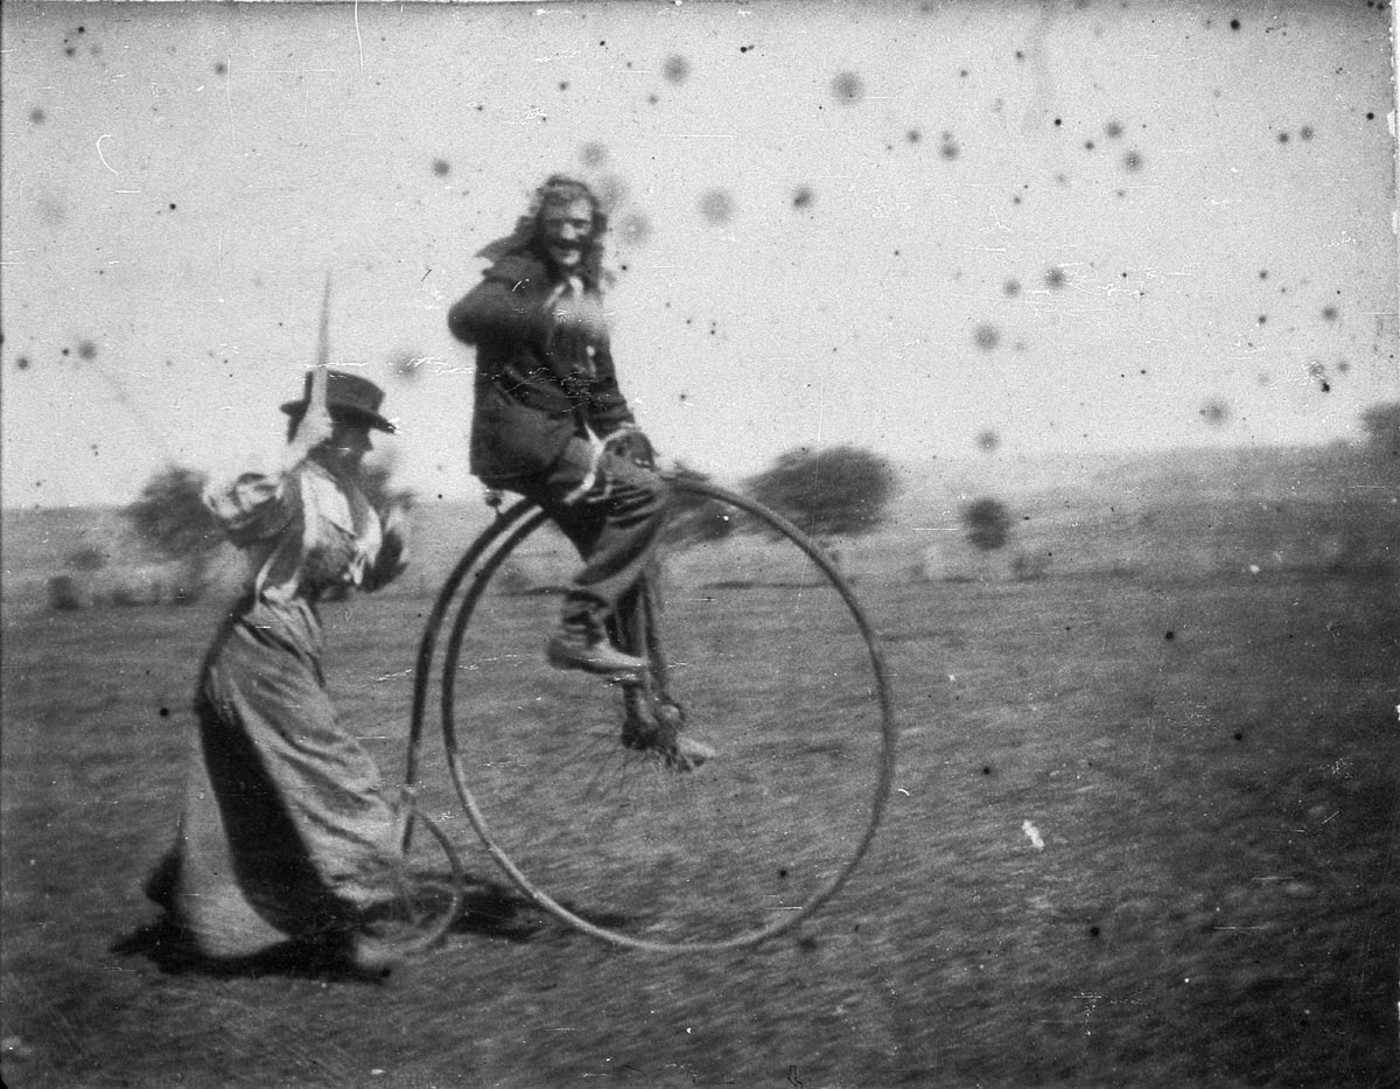 Man on a penny-farthing being chased by his sister